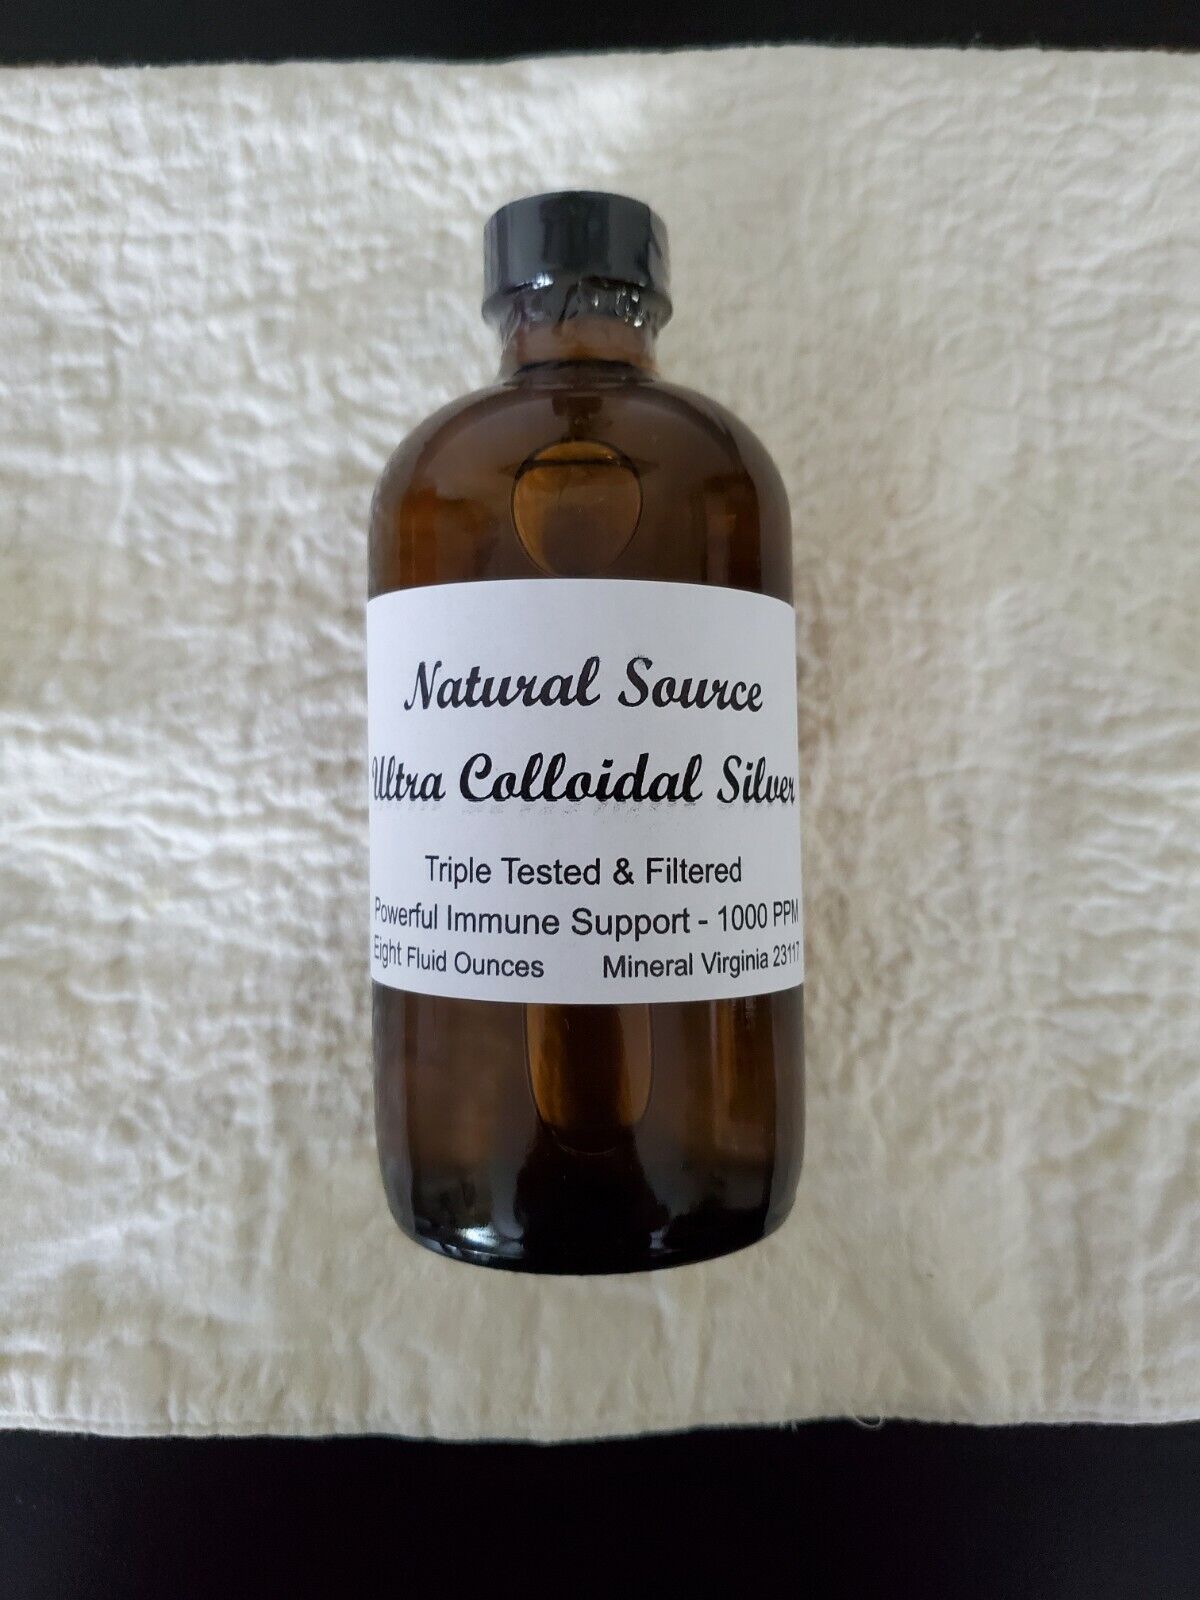 3 Bottles of Natural Source Ultra Colloidal Silver - Three 8oz Glass Bottles